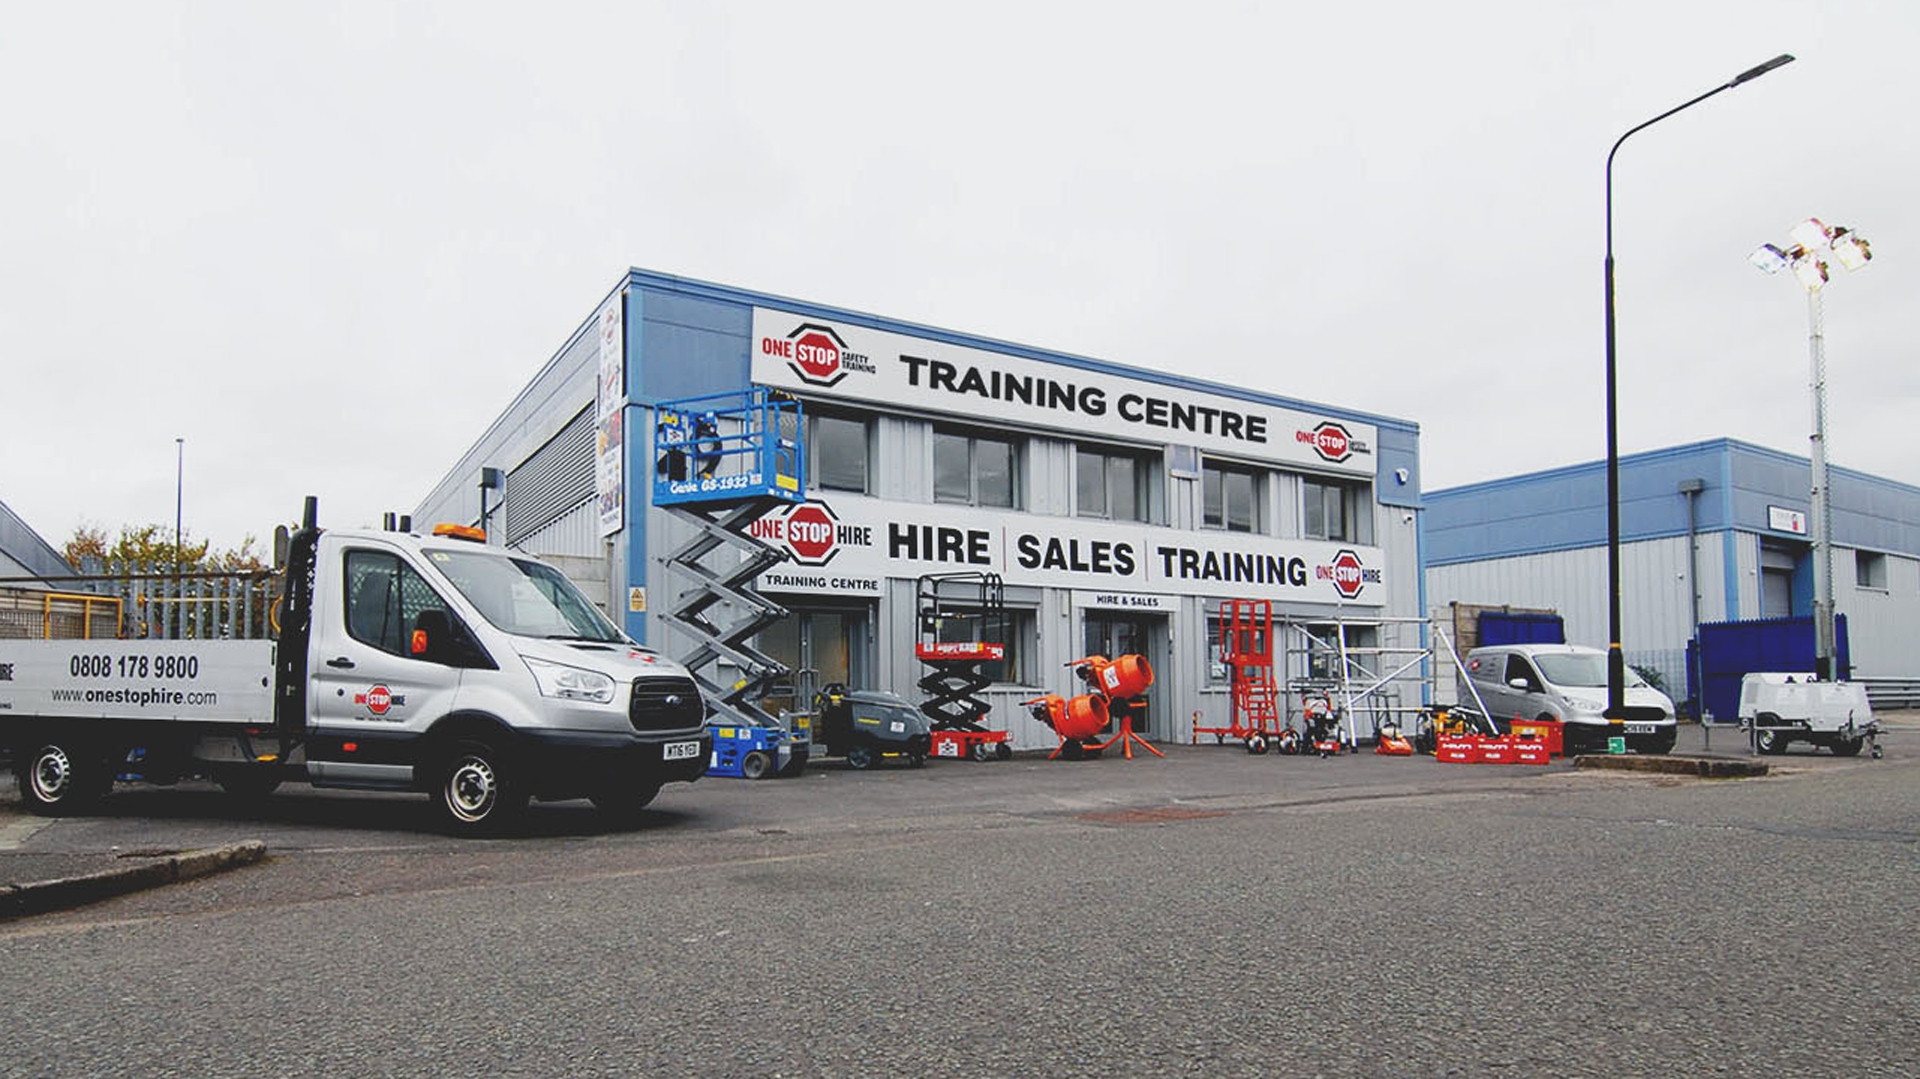 One Stop Hire Acquires Lord Hire Centres; pictured is One Stop's training centre.